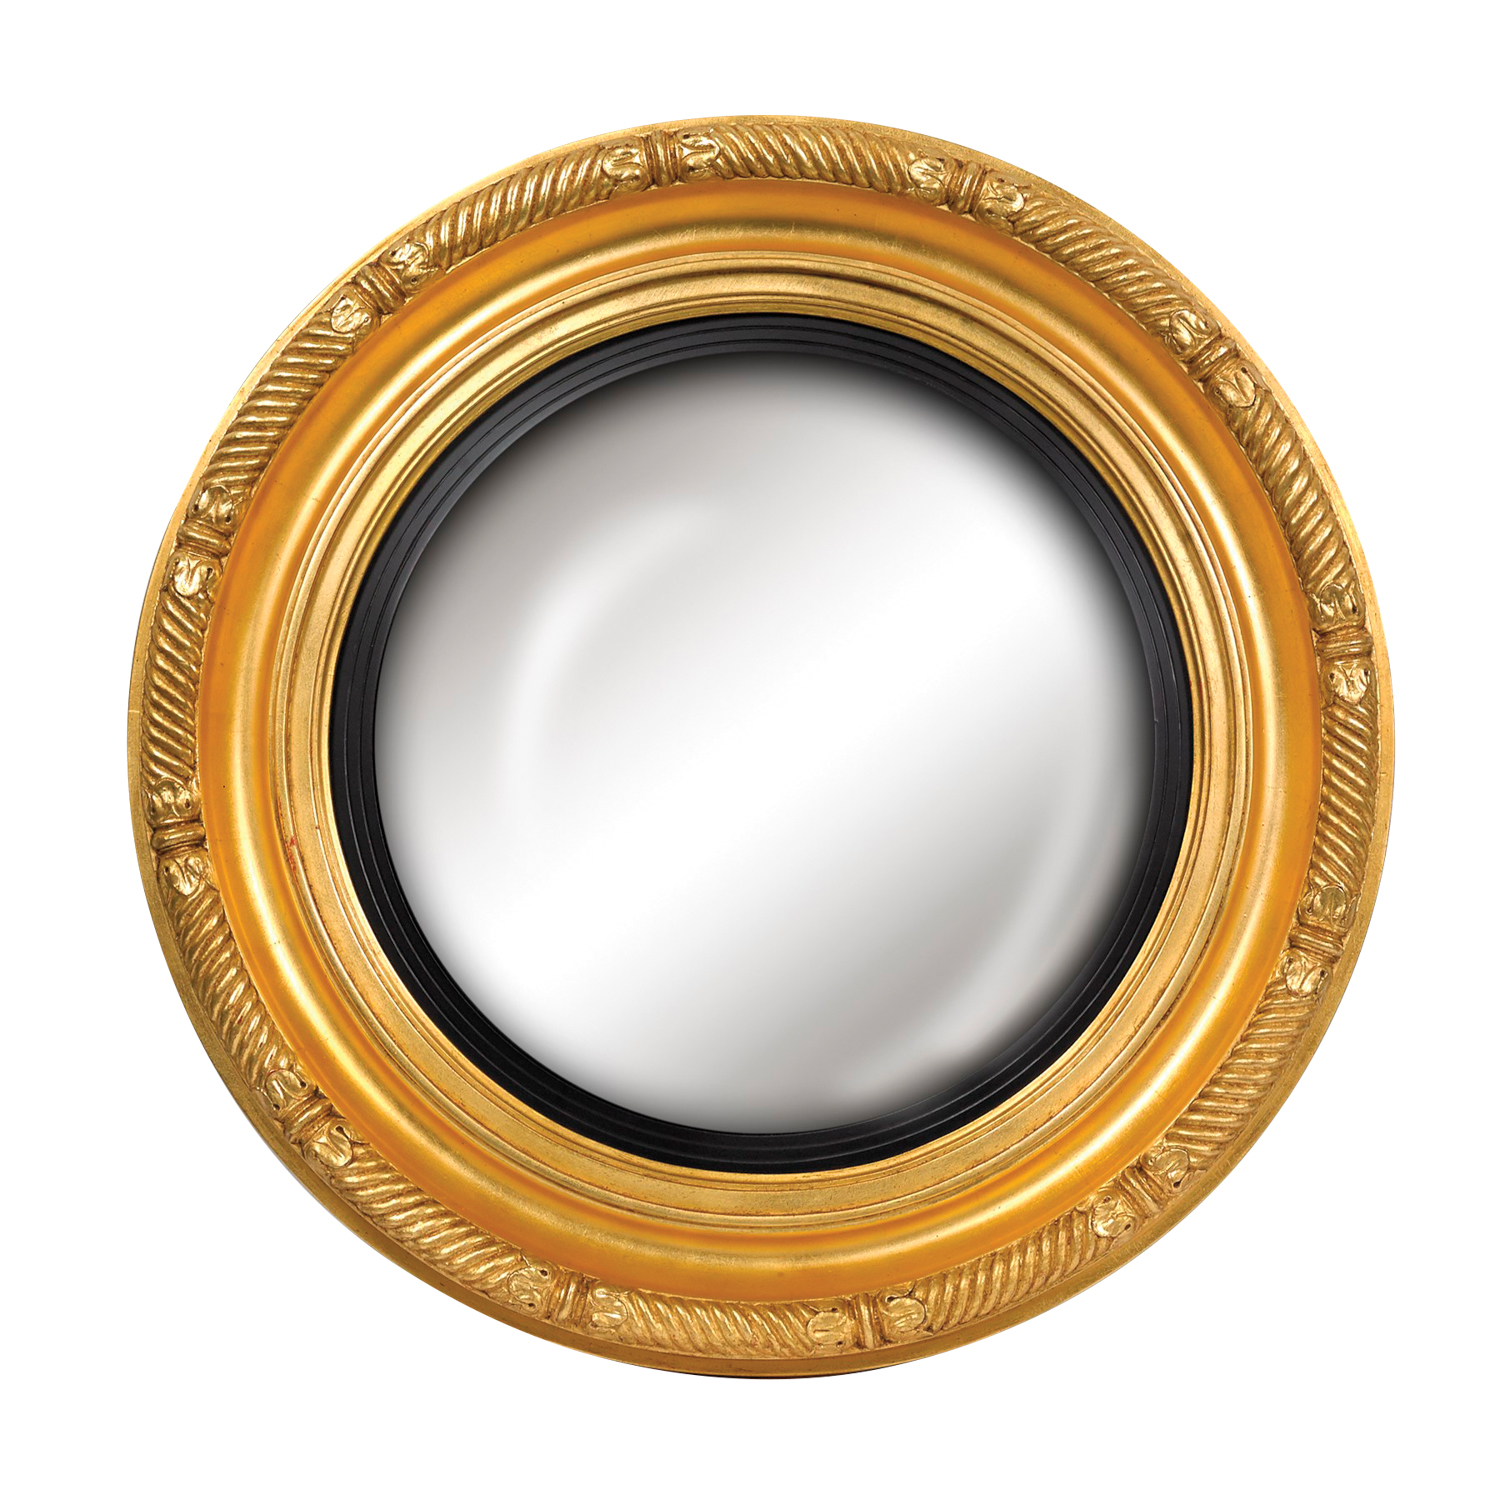 large circular gold-rimmed mirror with black ring in middle